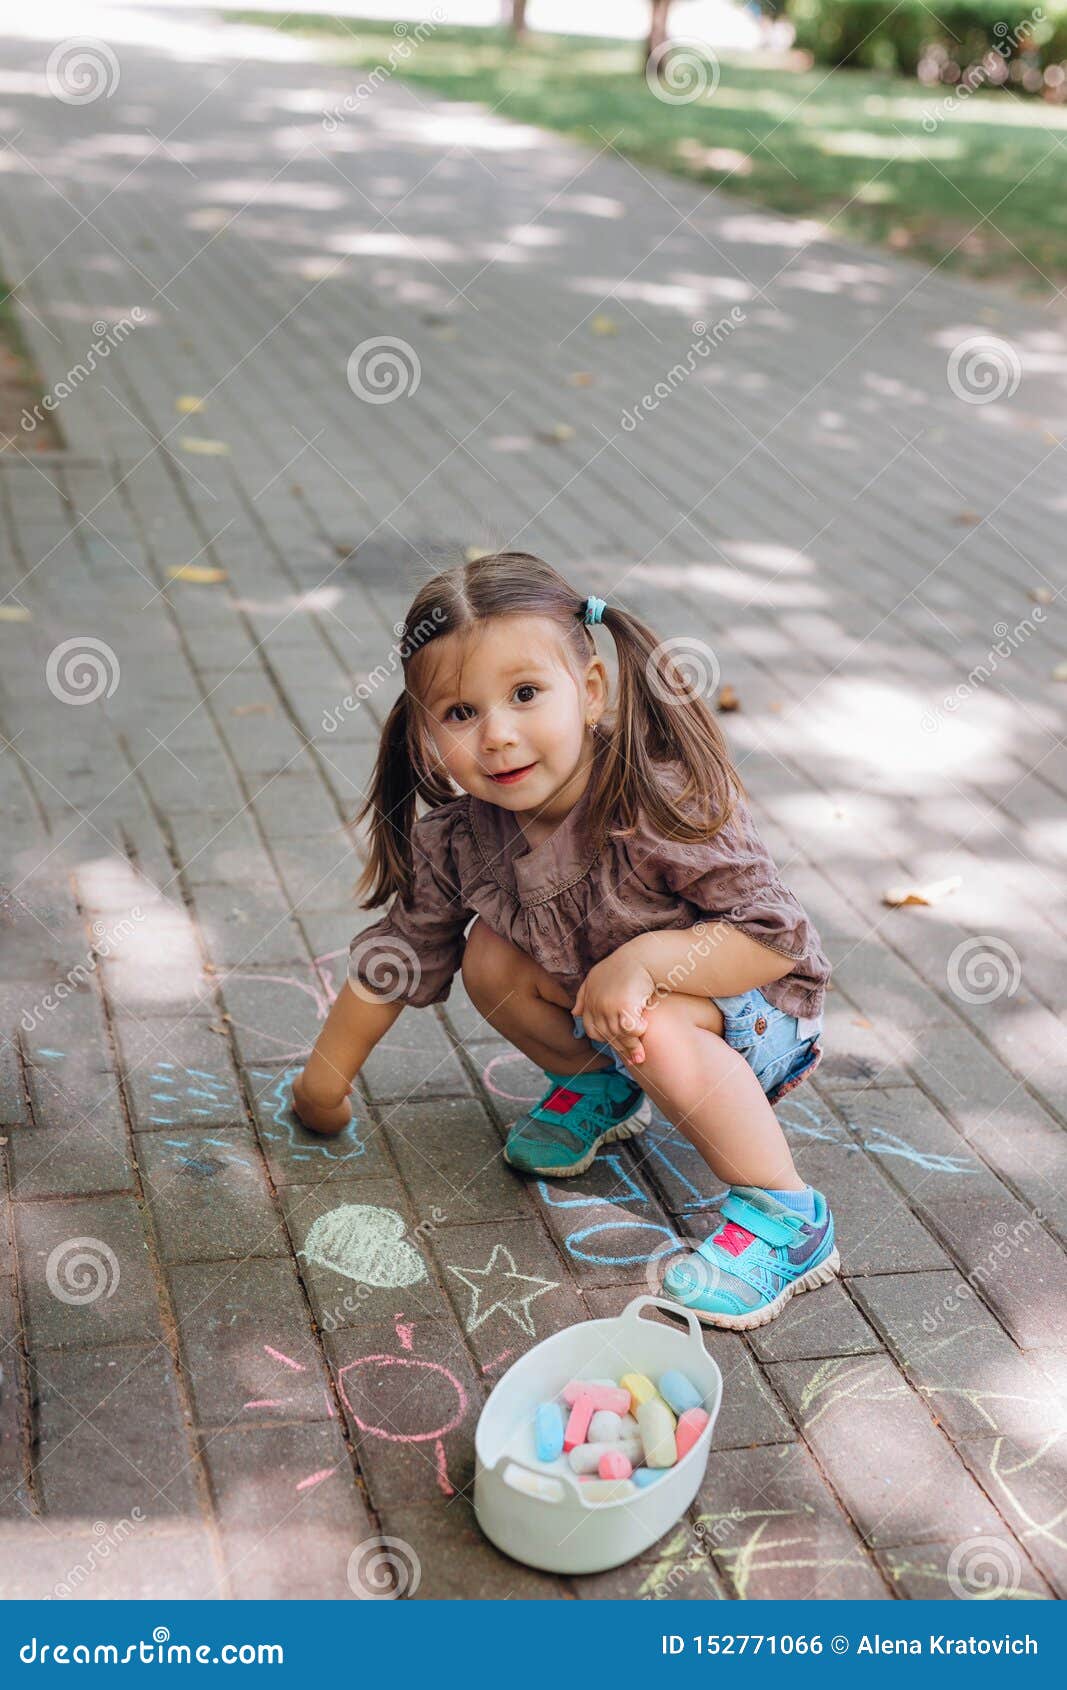 Cute Little Girl Drawing With Chalk Outdoors Stock Photo 